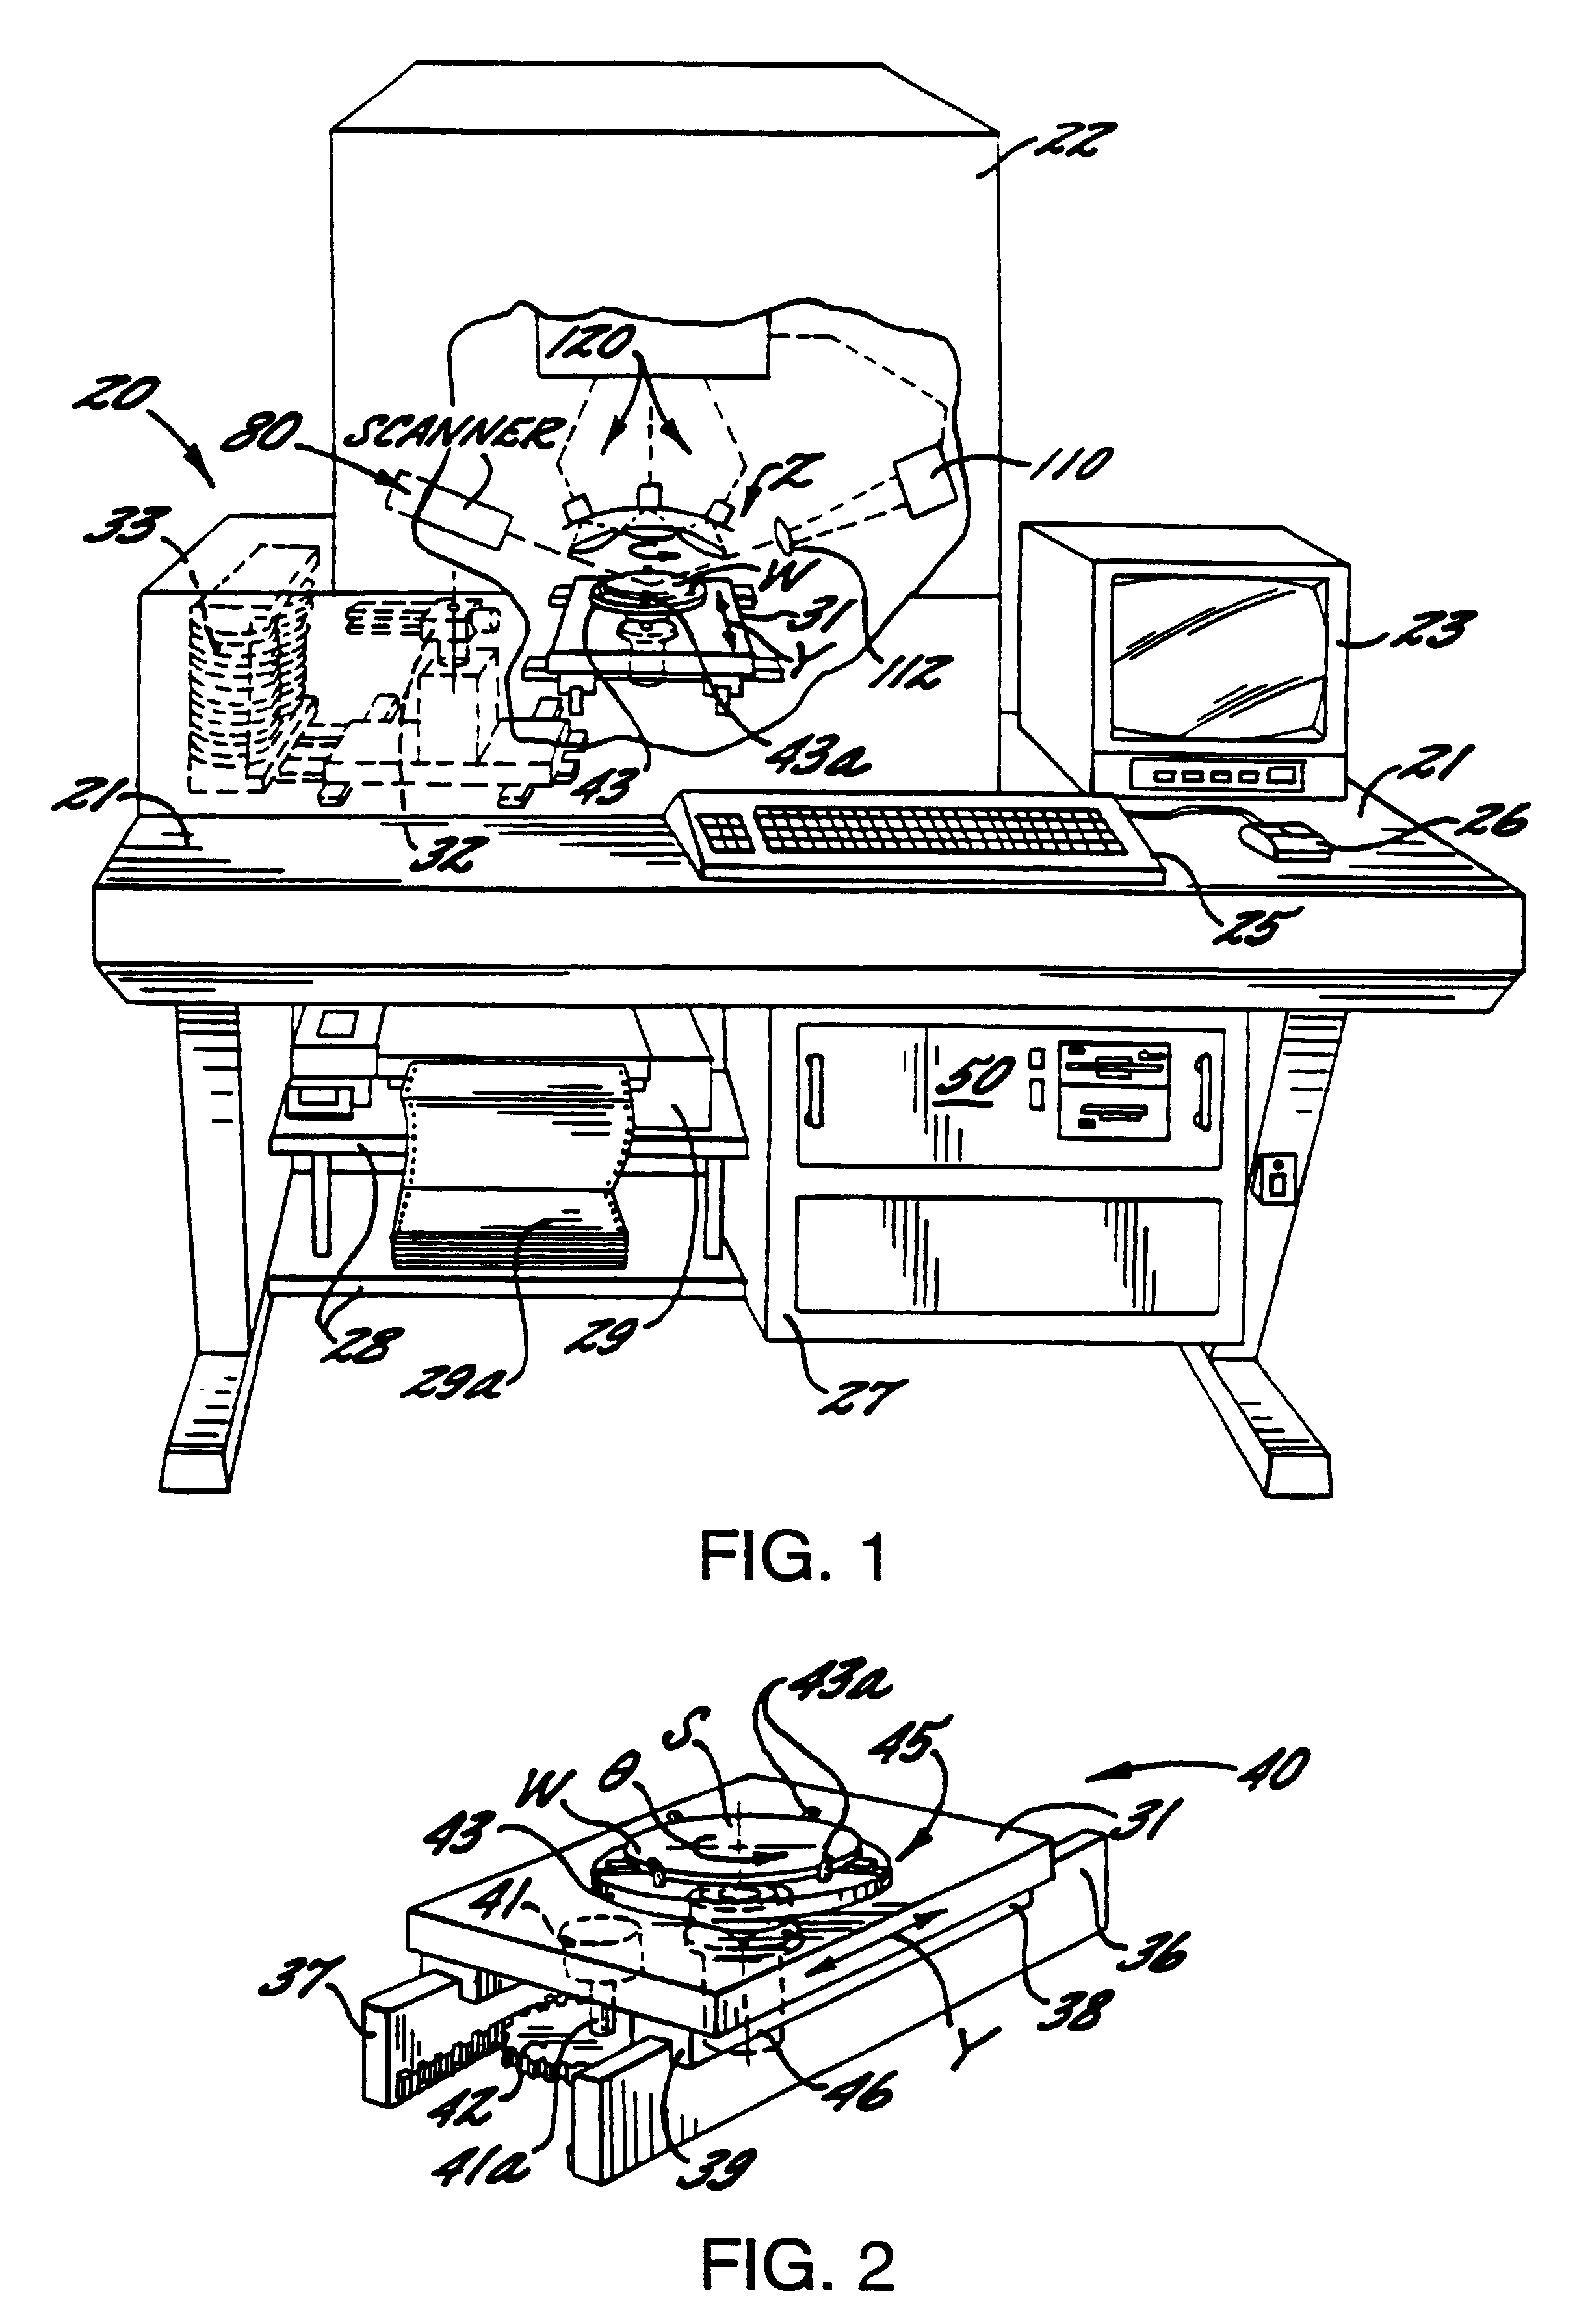 Wafer inspection system for distinguishing pits and particles